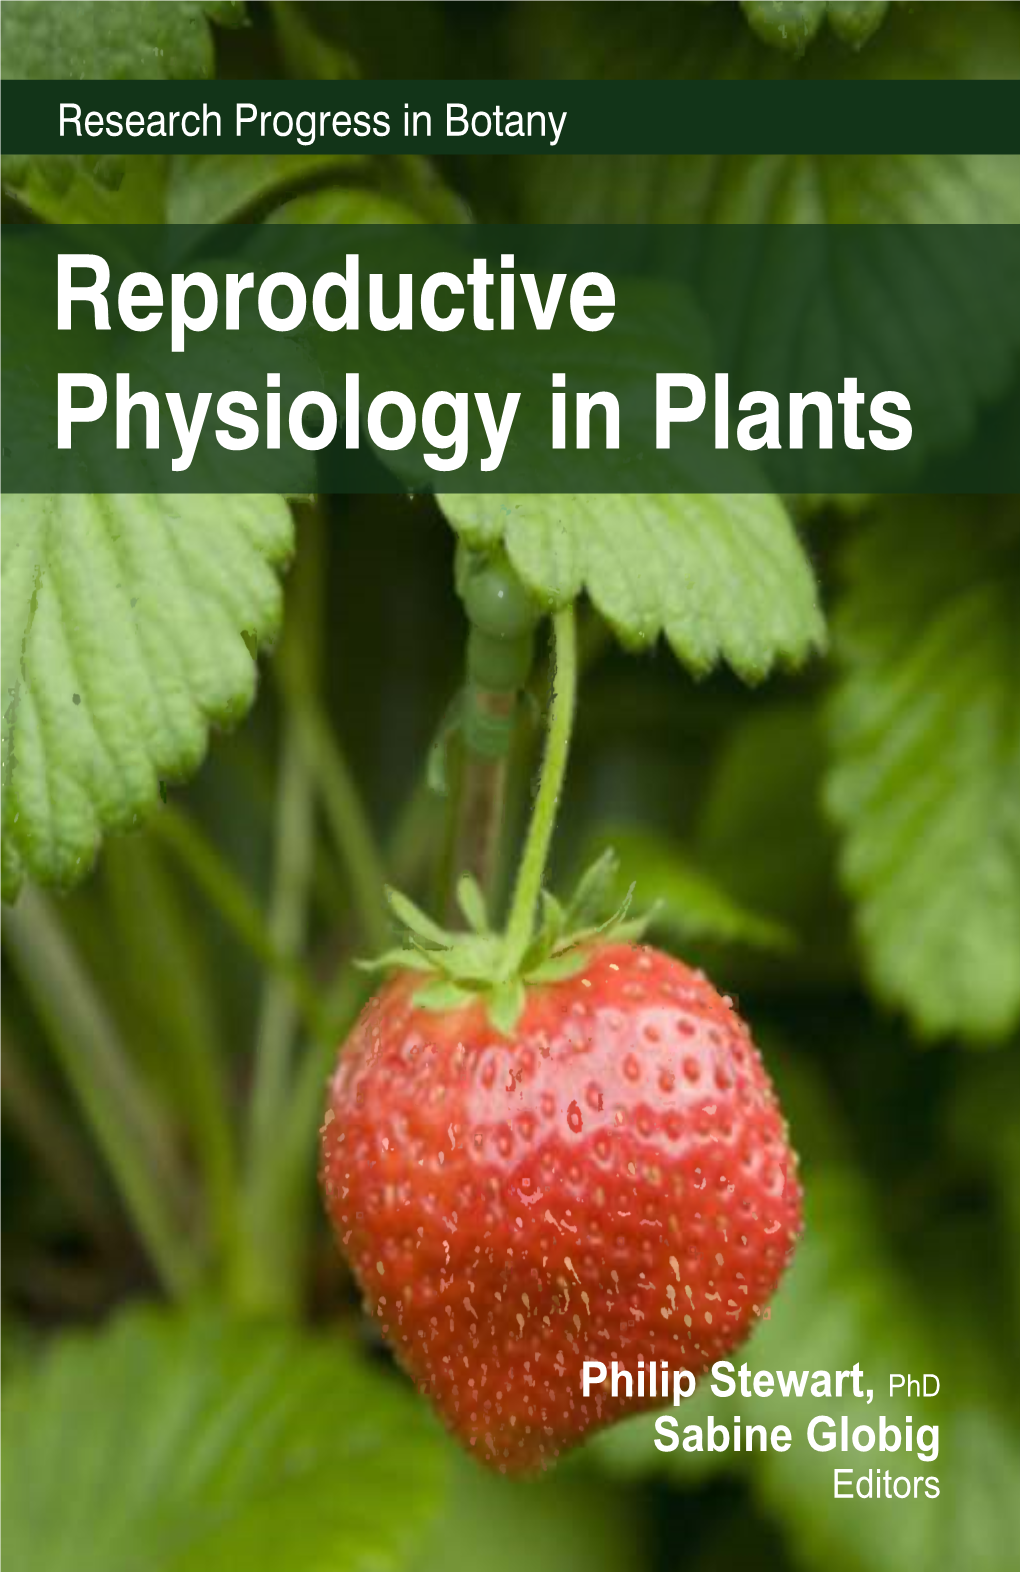 Reproductive Physiology in Plants Press Globig Apple Academic 00000 ISBN 978-1-926692-64-7 9 781926 692647